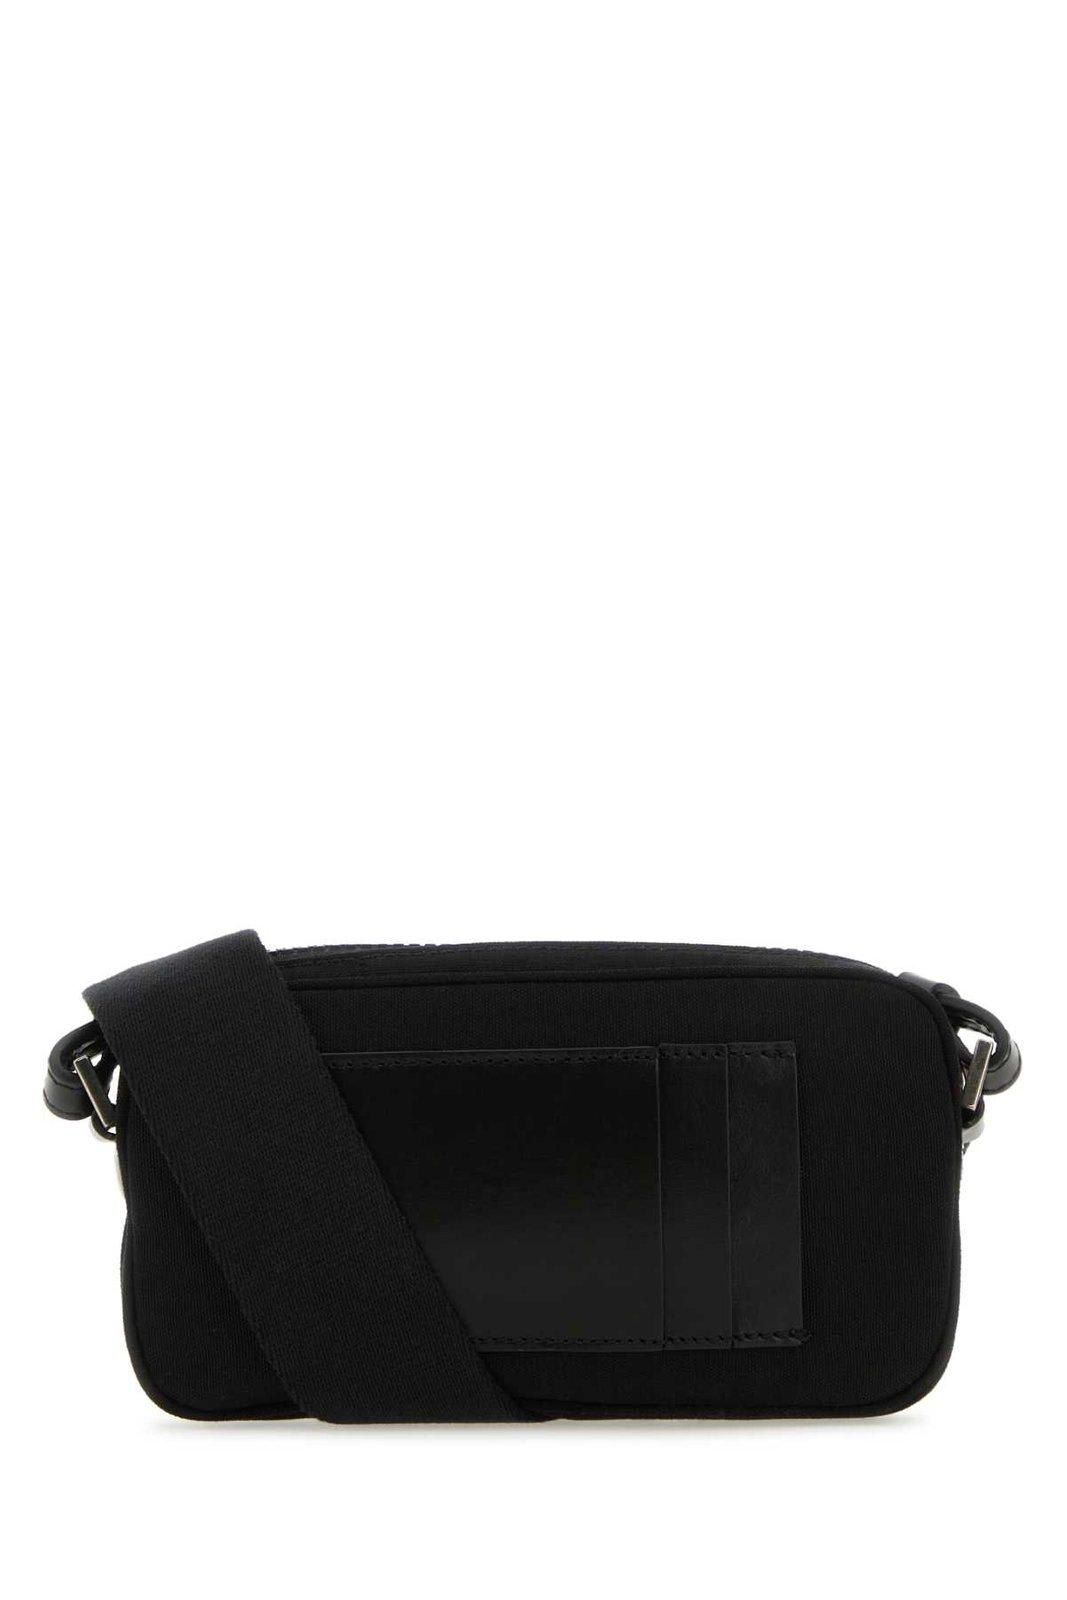 Shop Palm Angels Monogram Embroidered Zipped Messenger Bag In Nero/bianco